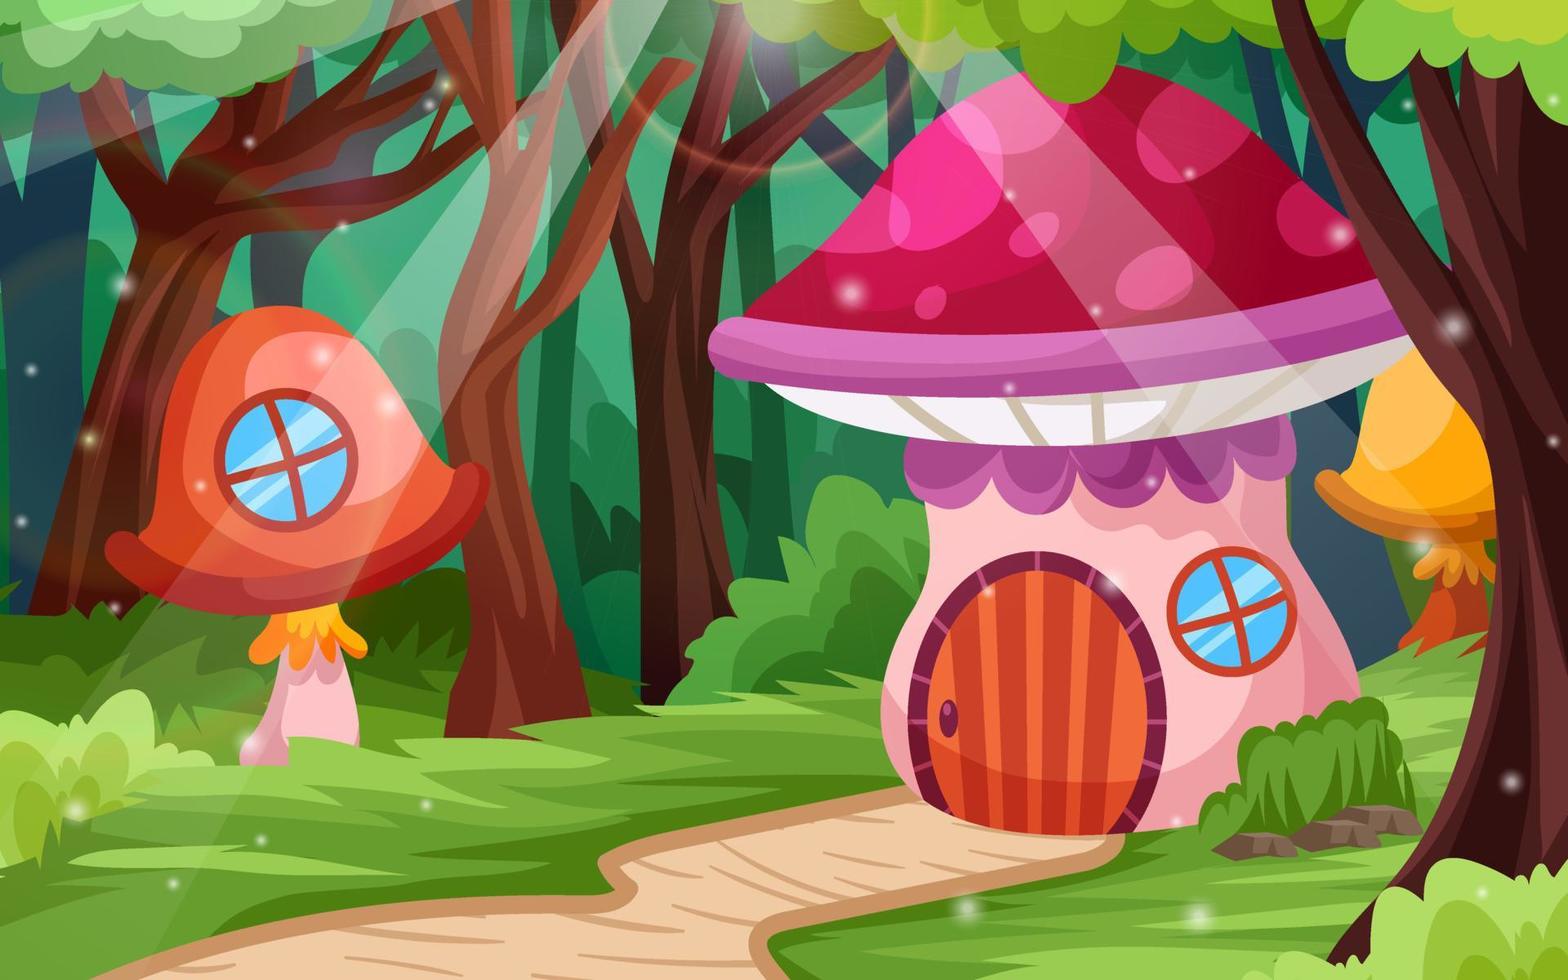 Enchanted forest with mushroom house for fairies vector